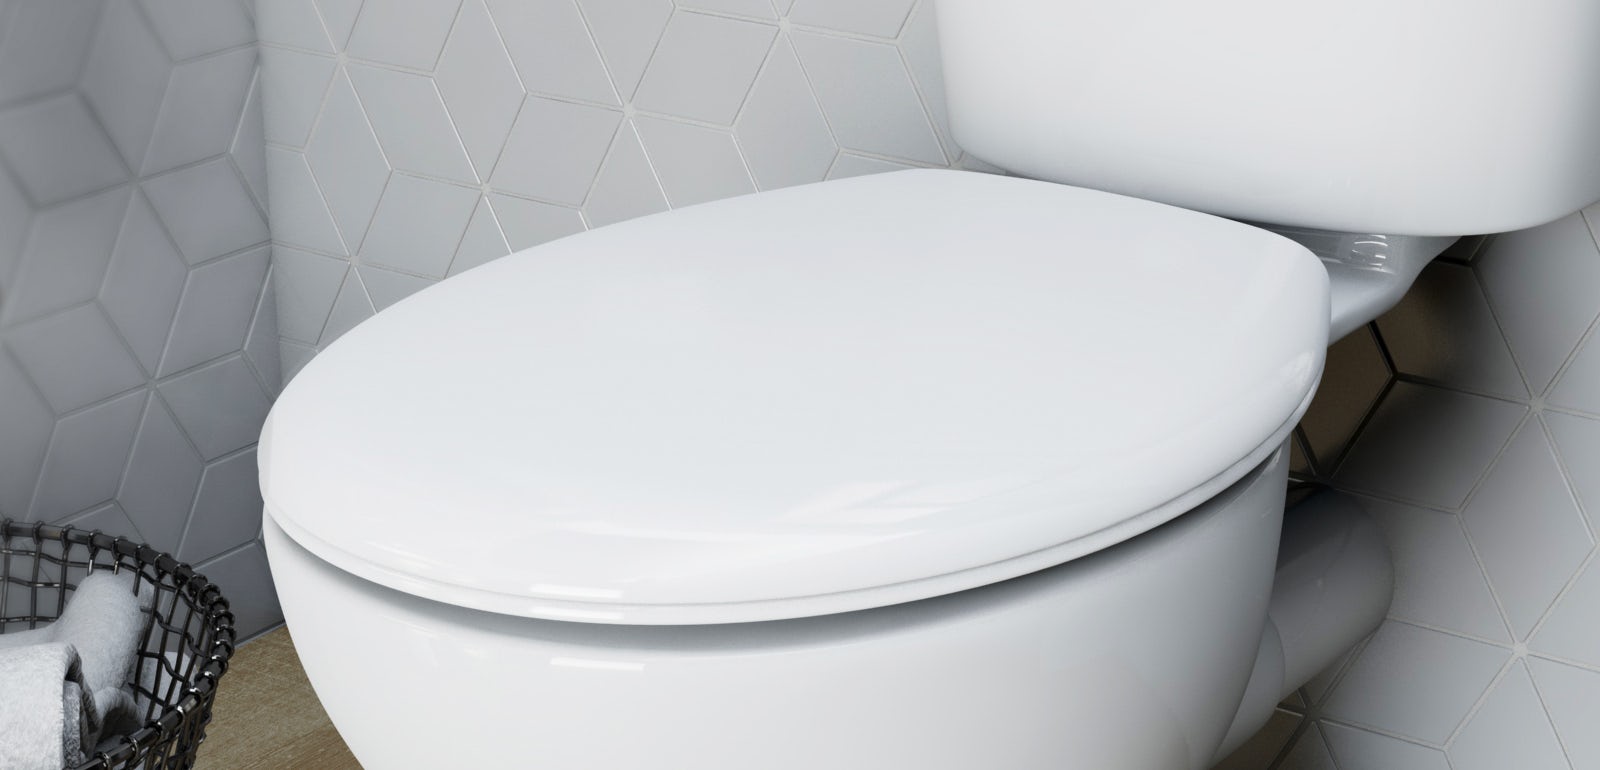 TOILET SEAT LUXURY EASY CLOSE TOP WITH FITTINGS EASY CLEAN UK STANDARD SIZE NEW